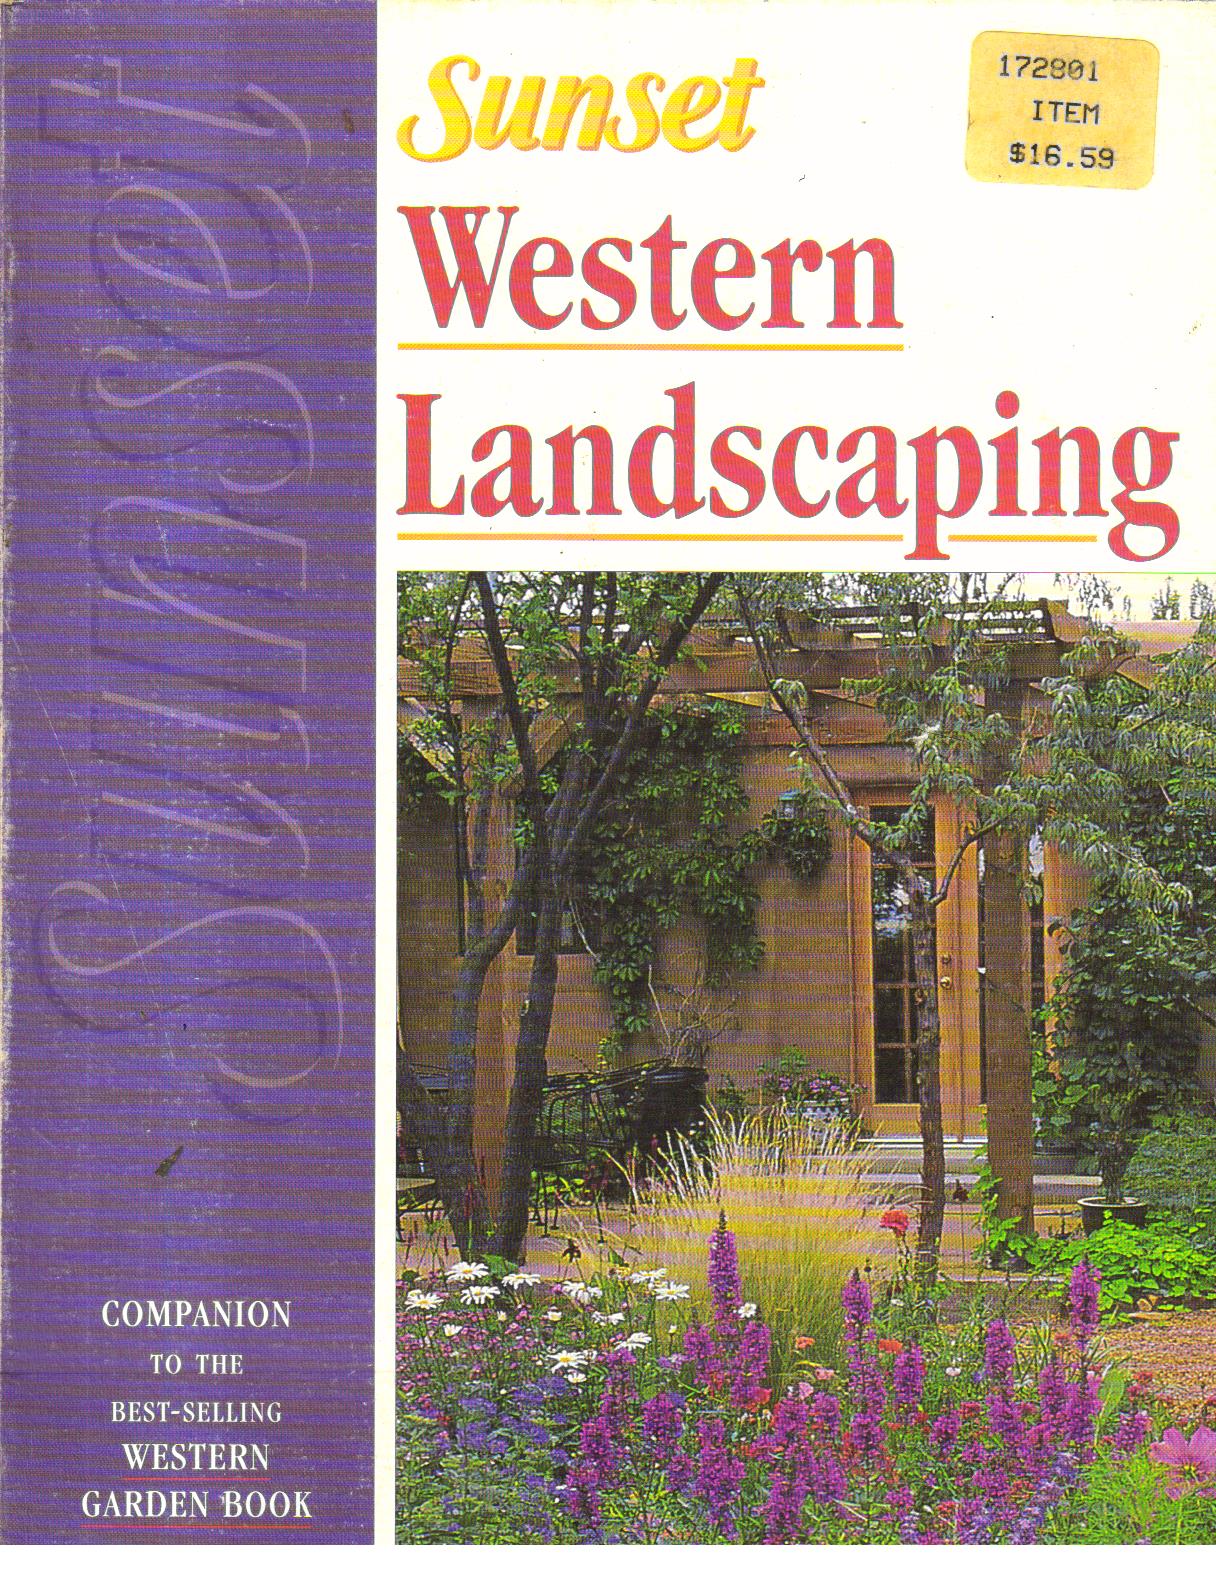 Western Landscaping.